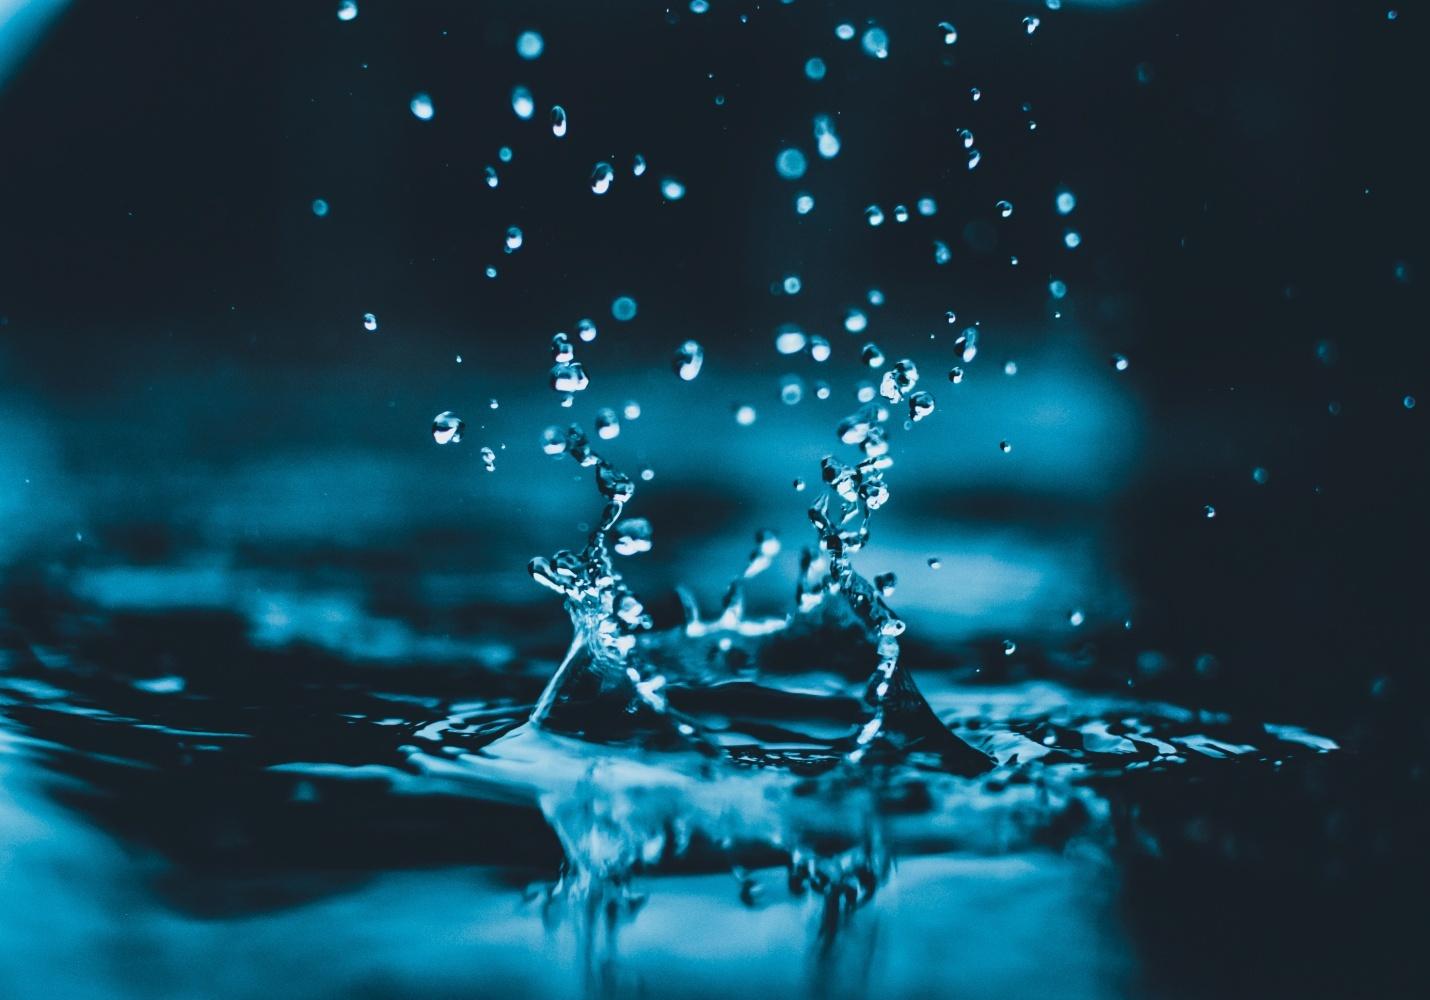 5 IMPORTANT DEVELOPMENTS FOR THE WATER INDUSTRY OVER THE NEXT DECADE